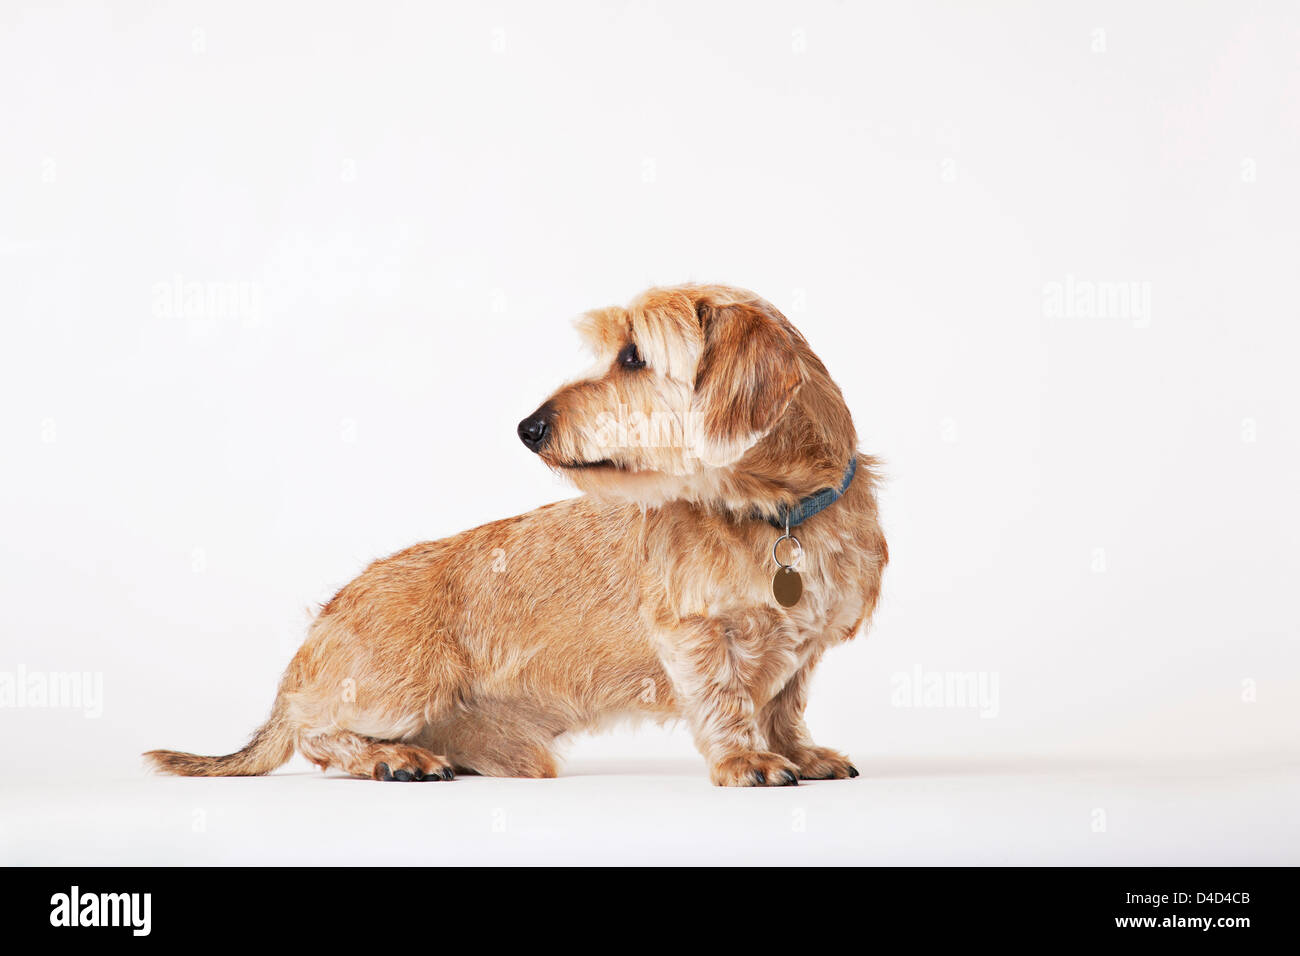 Dog looking over its shoulder Stock Photo